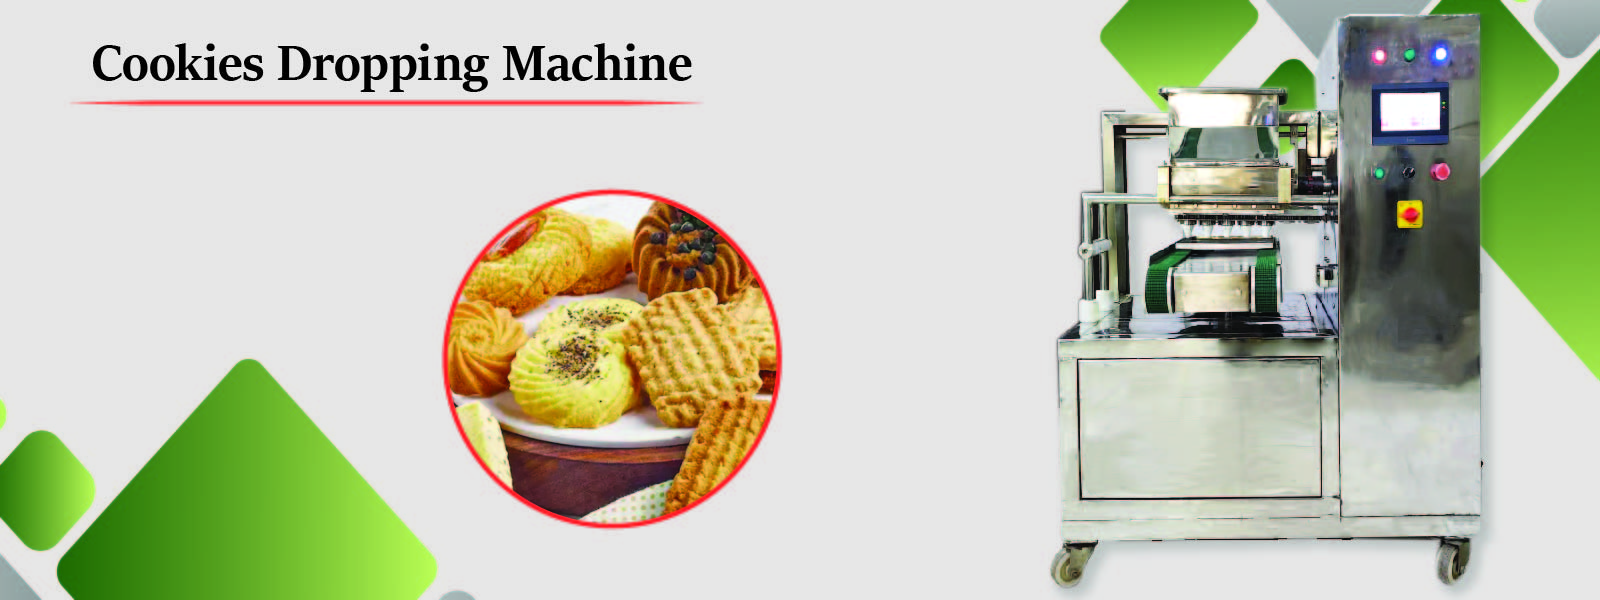 Cookies dropping machine